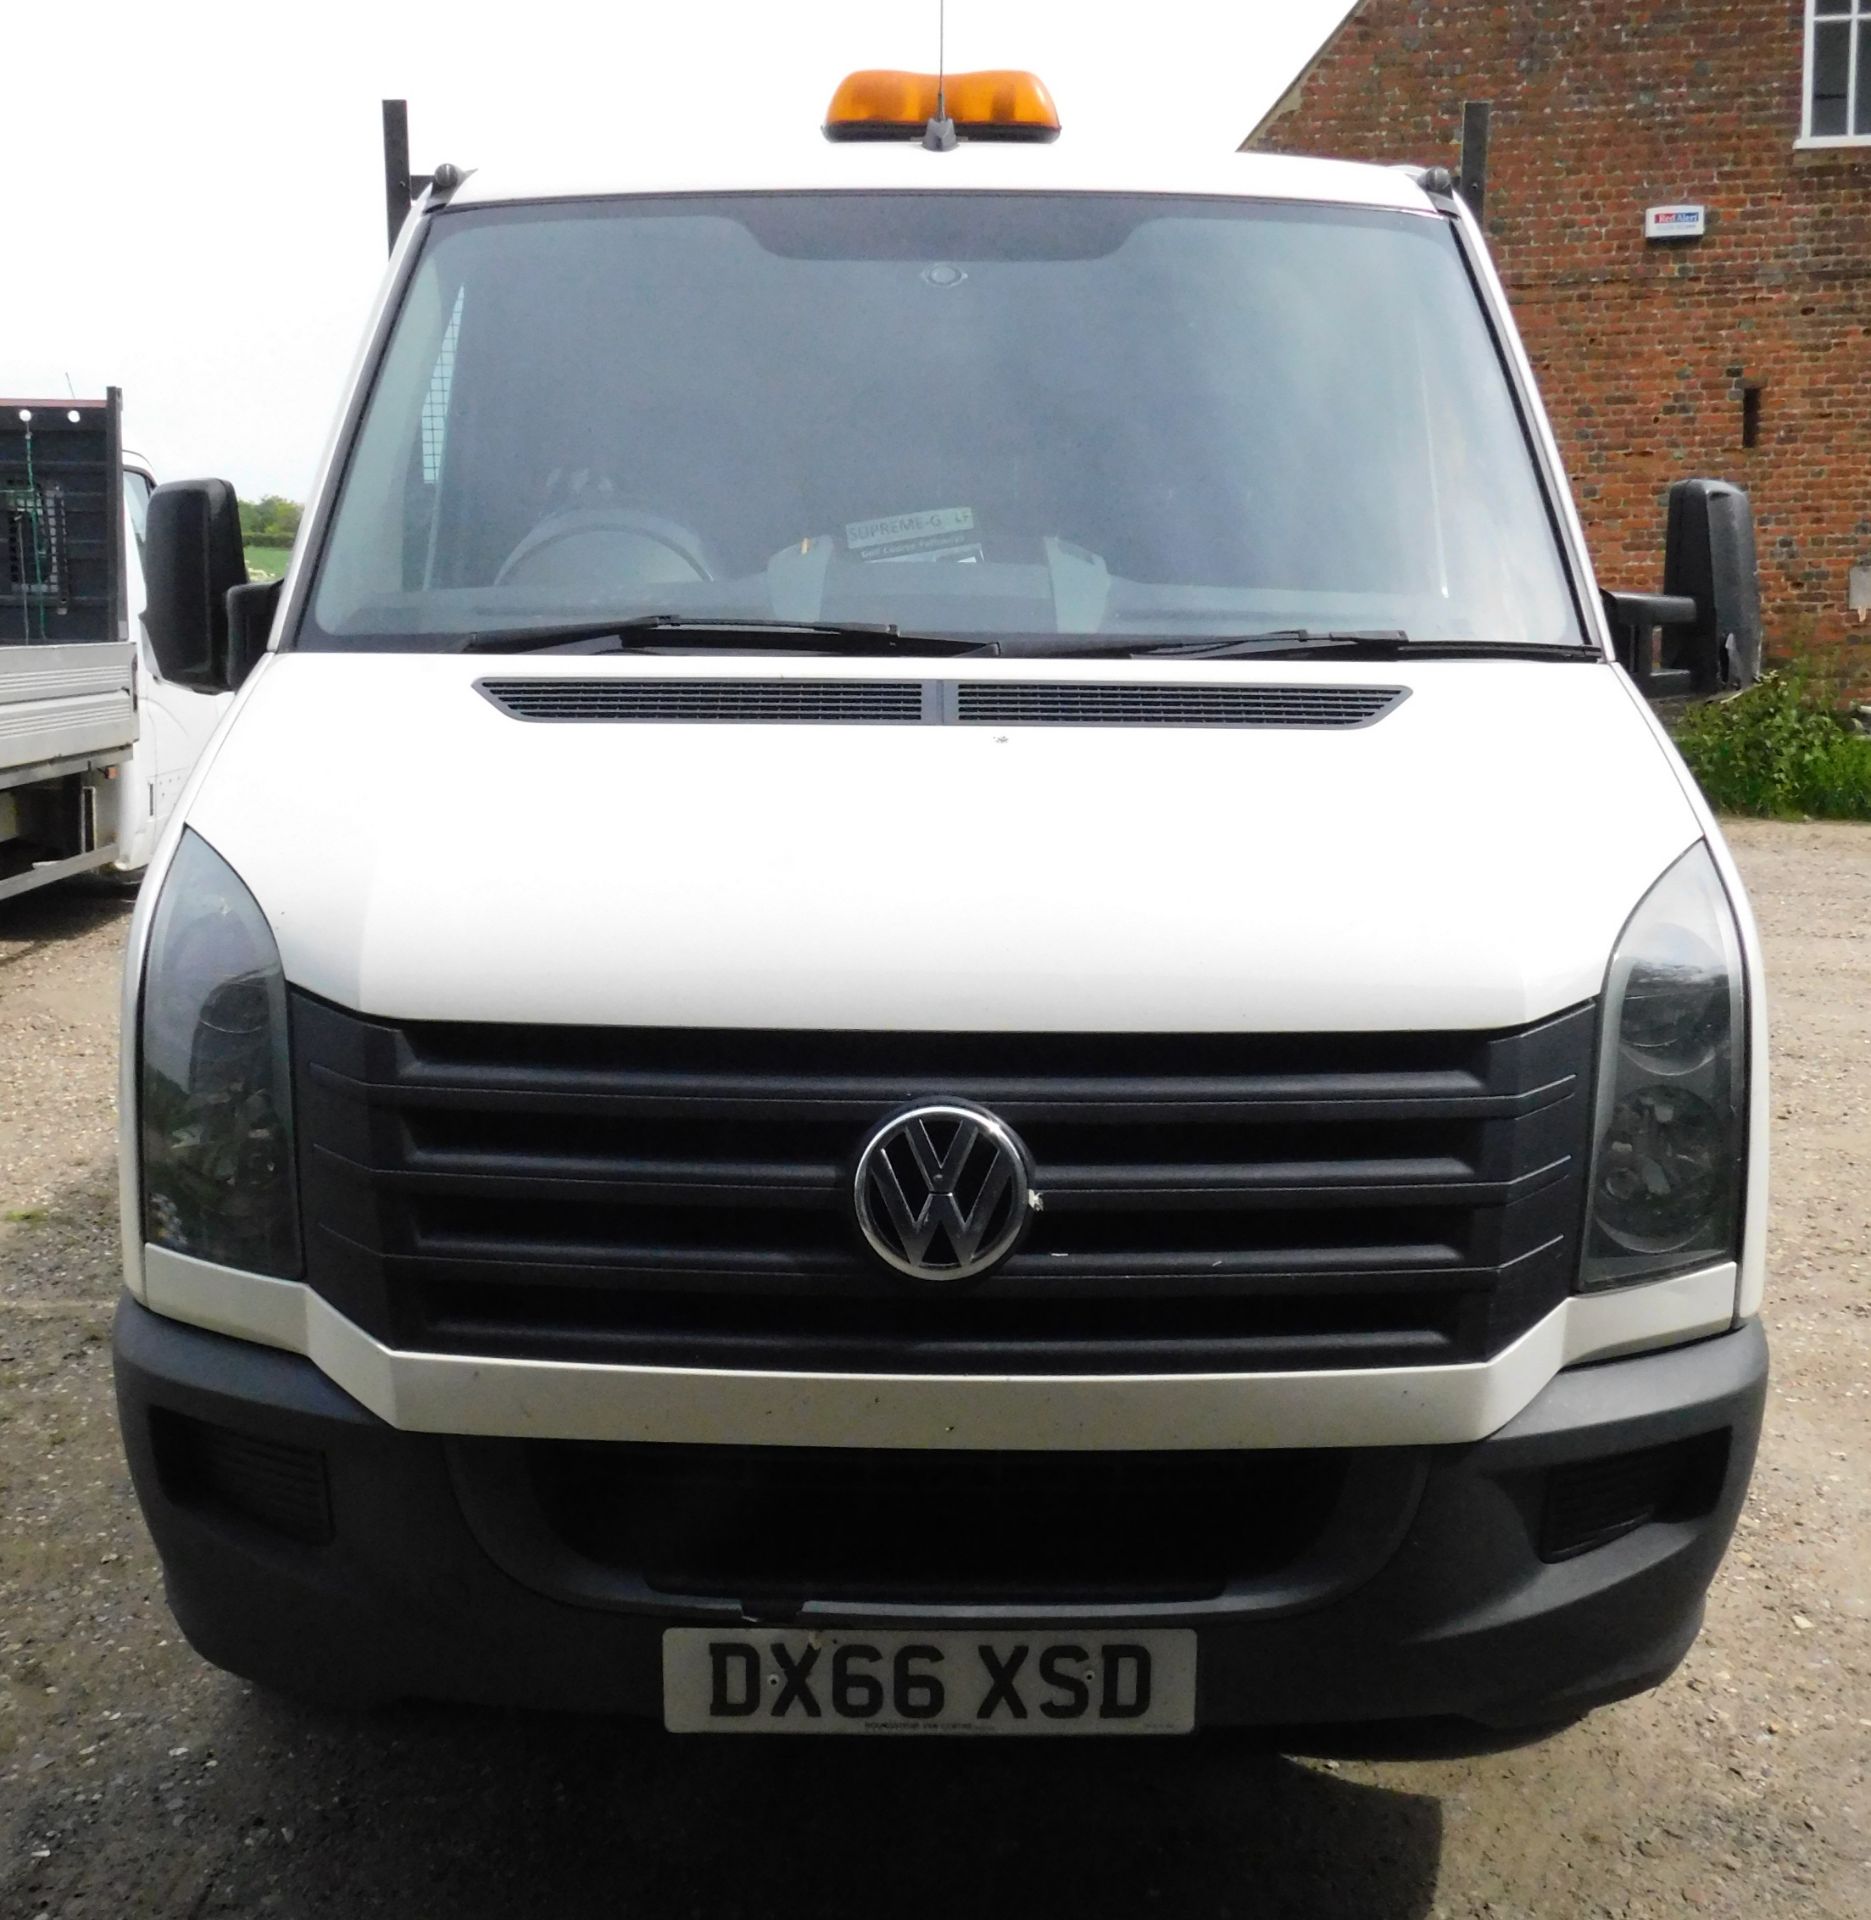 Volkswagen Crafter CR35 LWB, 2.0 TDI 136PS Chassis Cab, Registration DX66 XSD, First Registered 29th - Bild 2 aus 28